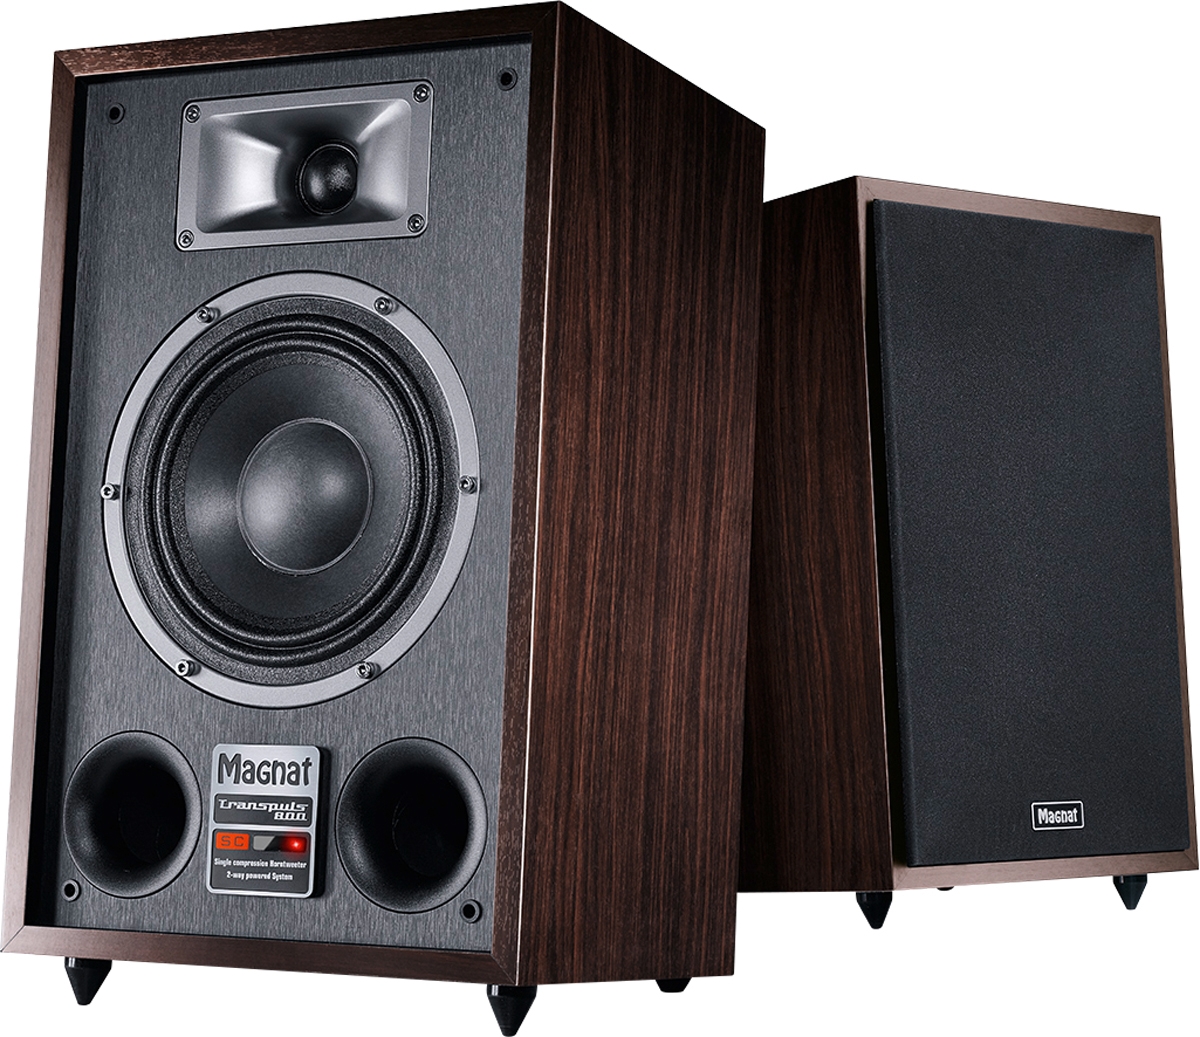 Magnat Transpuls 800A Active  2-Way Speaker System With Bluetooth, Hdmi, Digital And Analog Inputs.